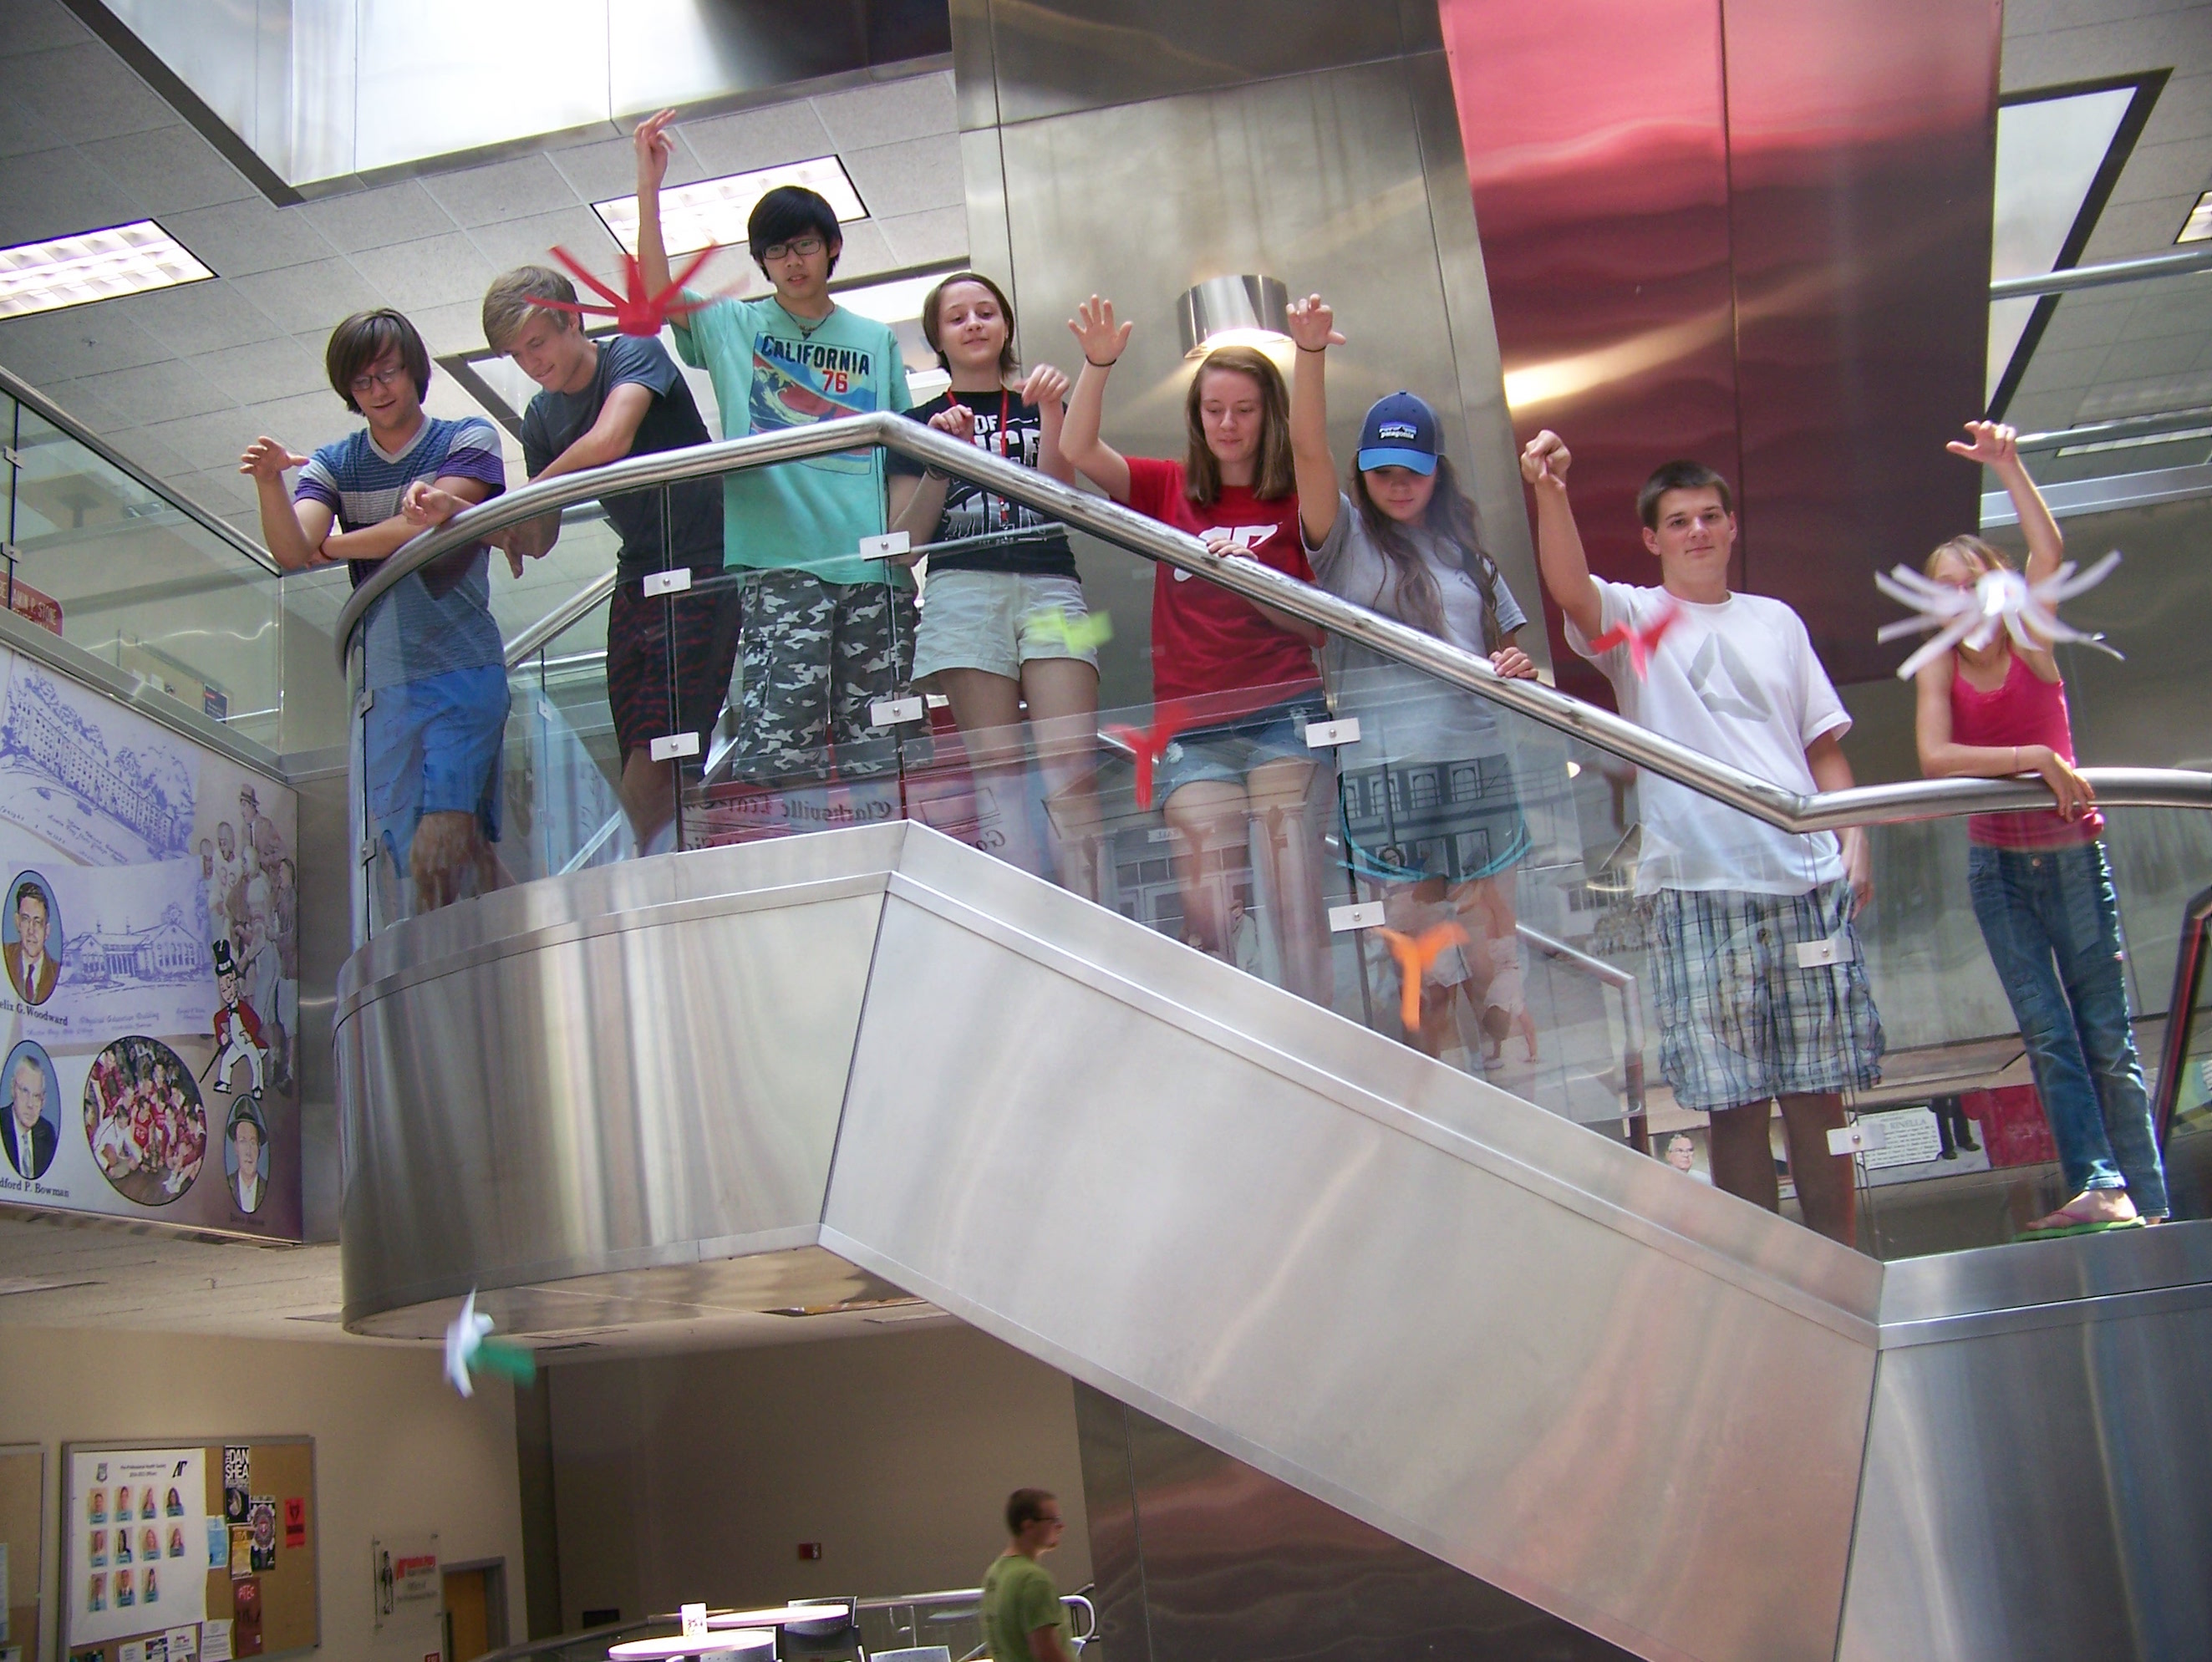 APSU’s SOARing with Mathematics camp gives high schoolers hands-on STEM experiences